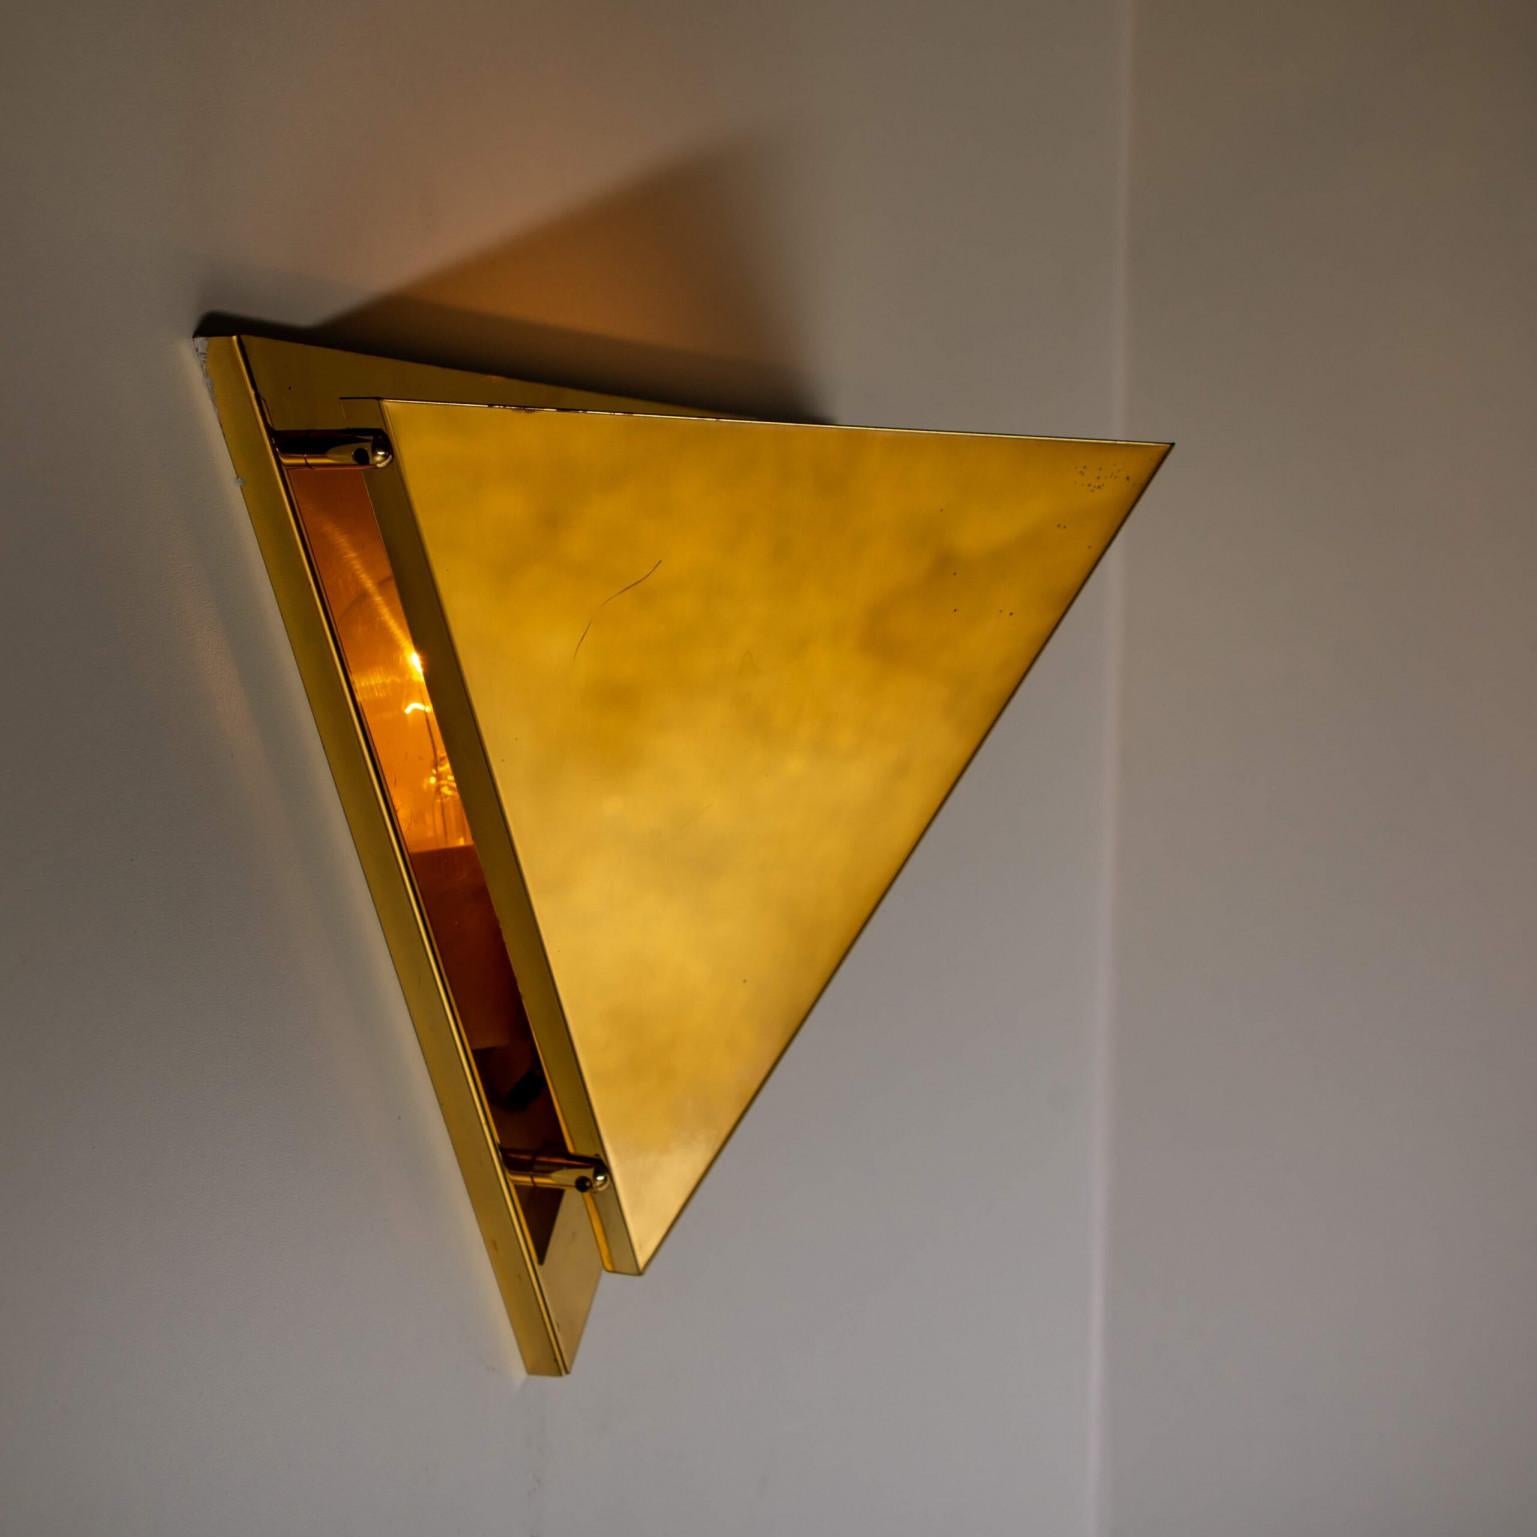 1 of the 5 Pyramid Shaped Massive Brass Wall Lamps, 1970s For Sale 2